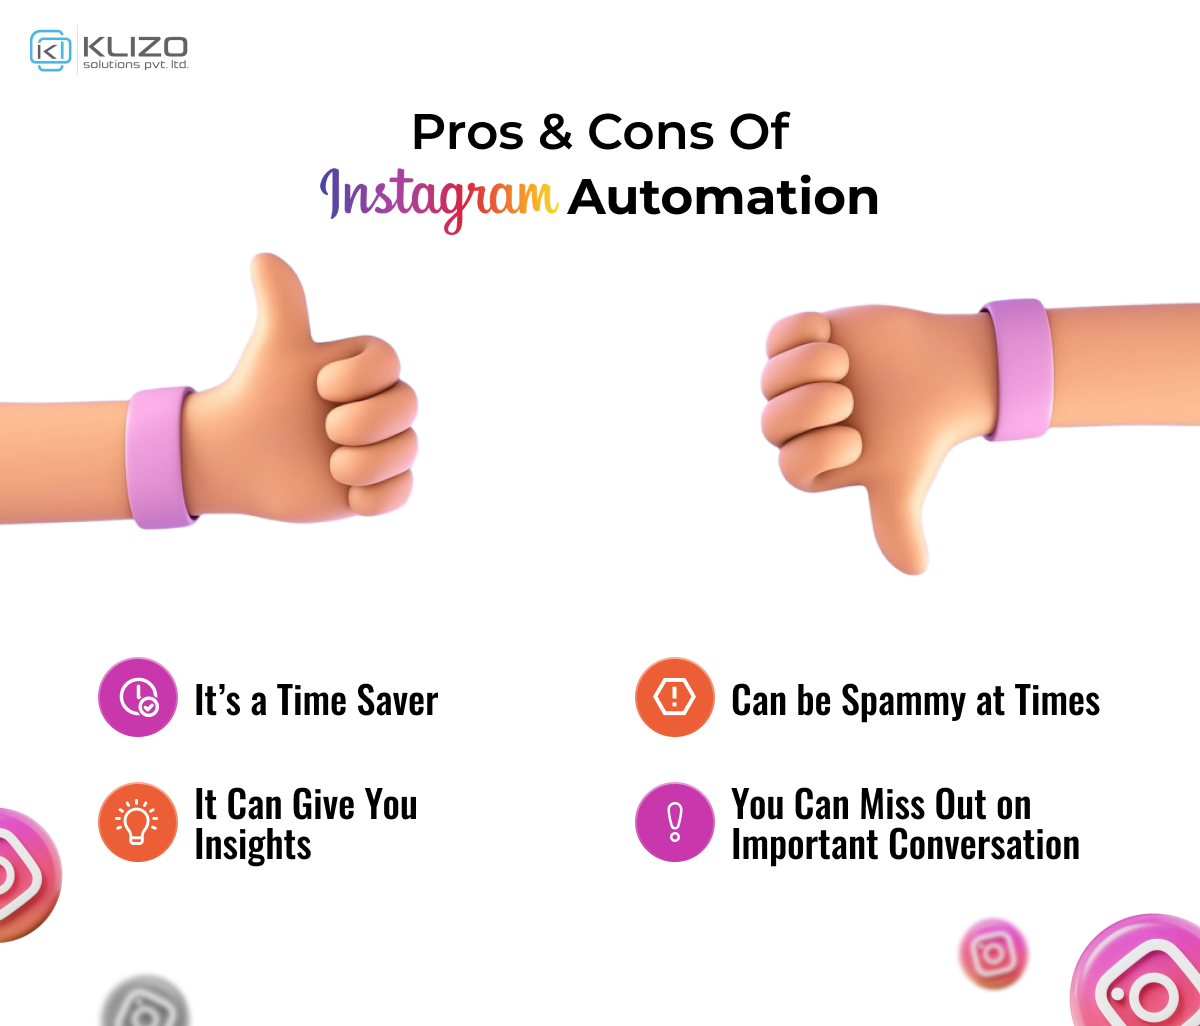 Pros & Cons of Instagram Automation